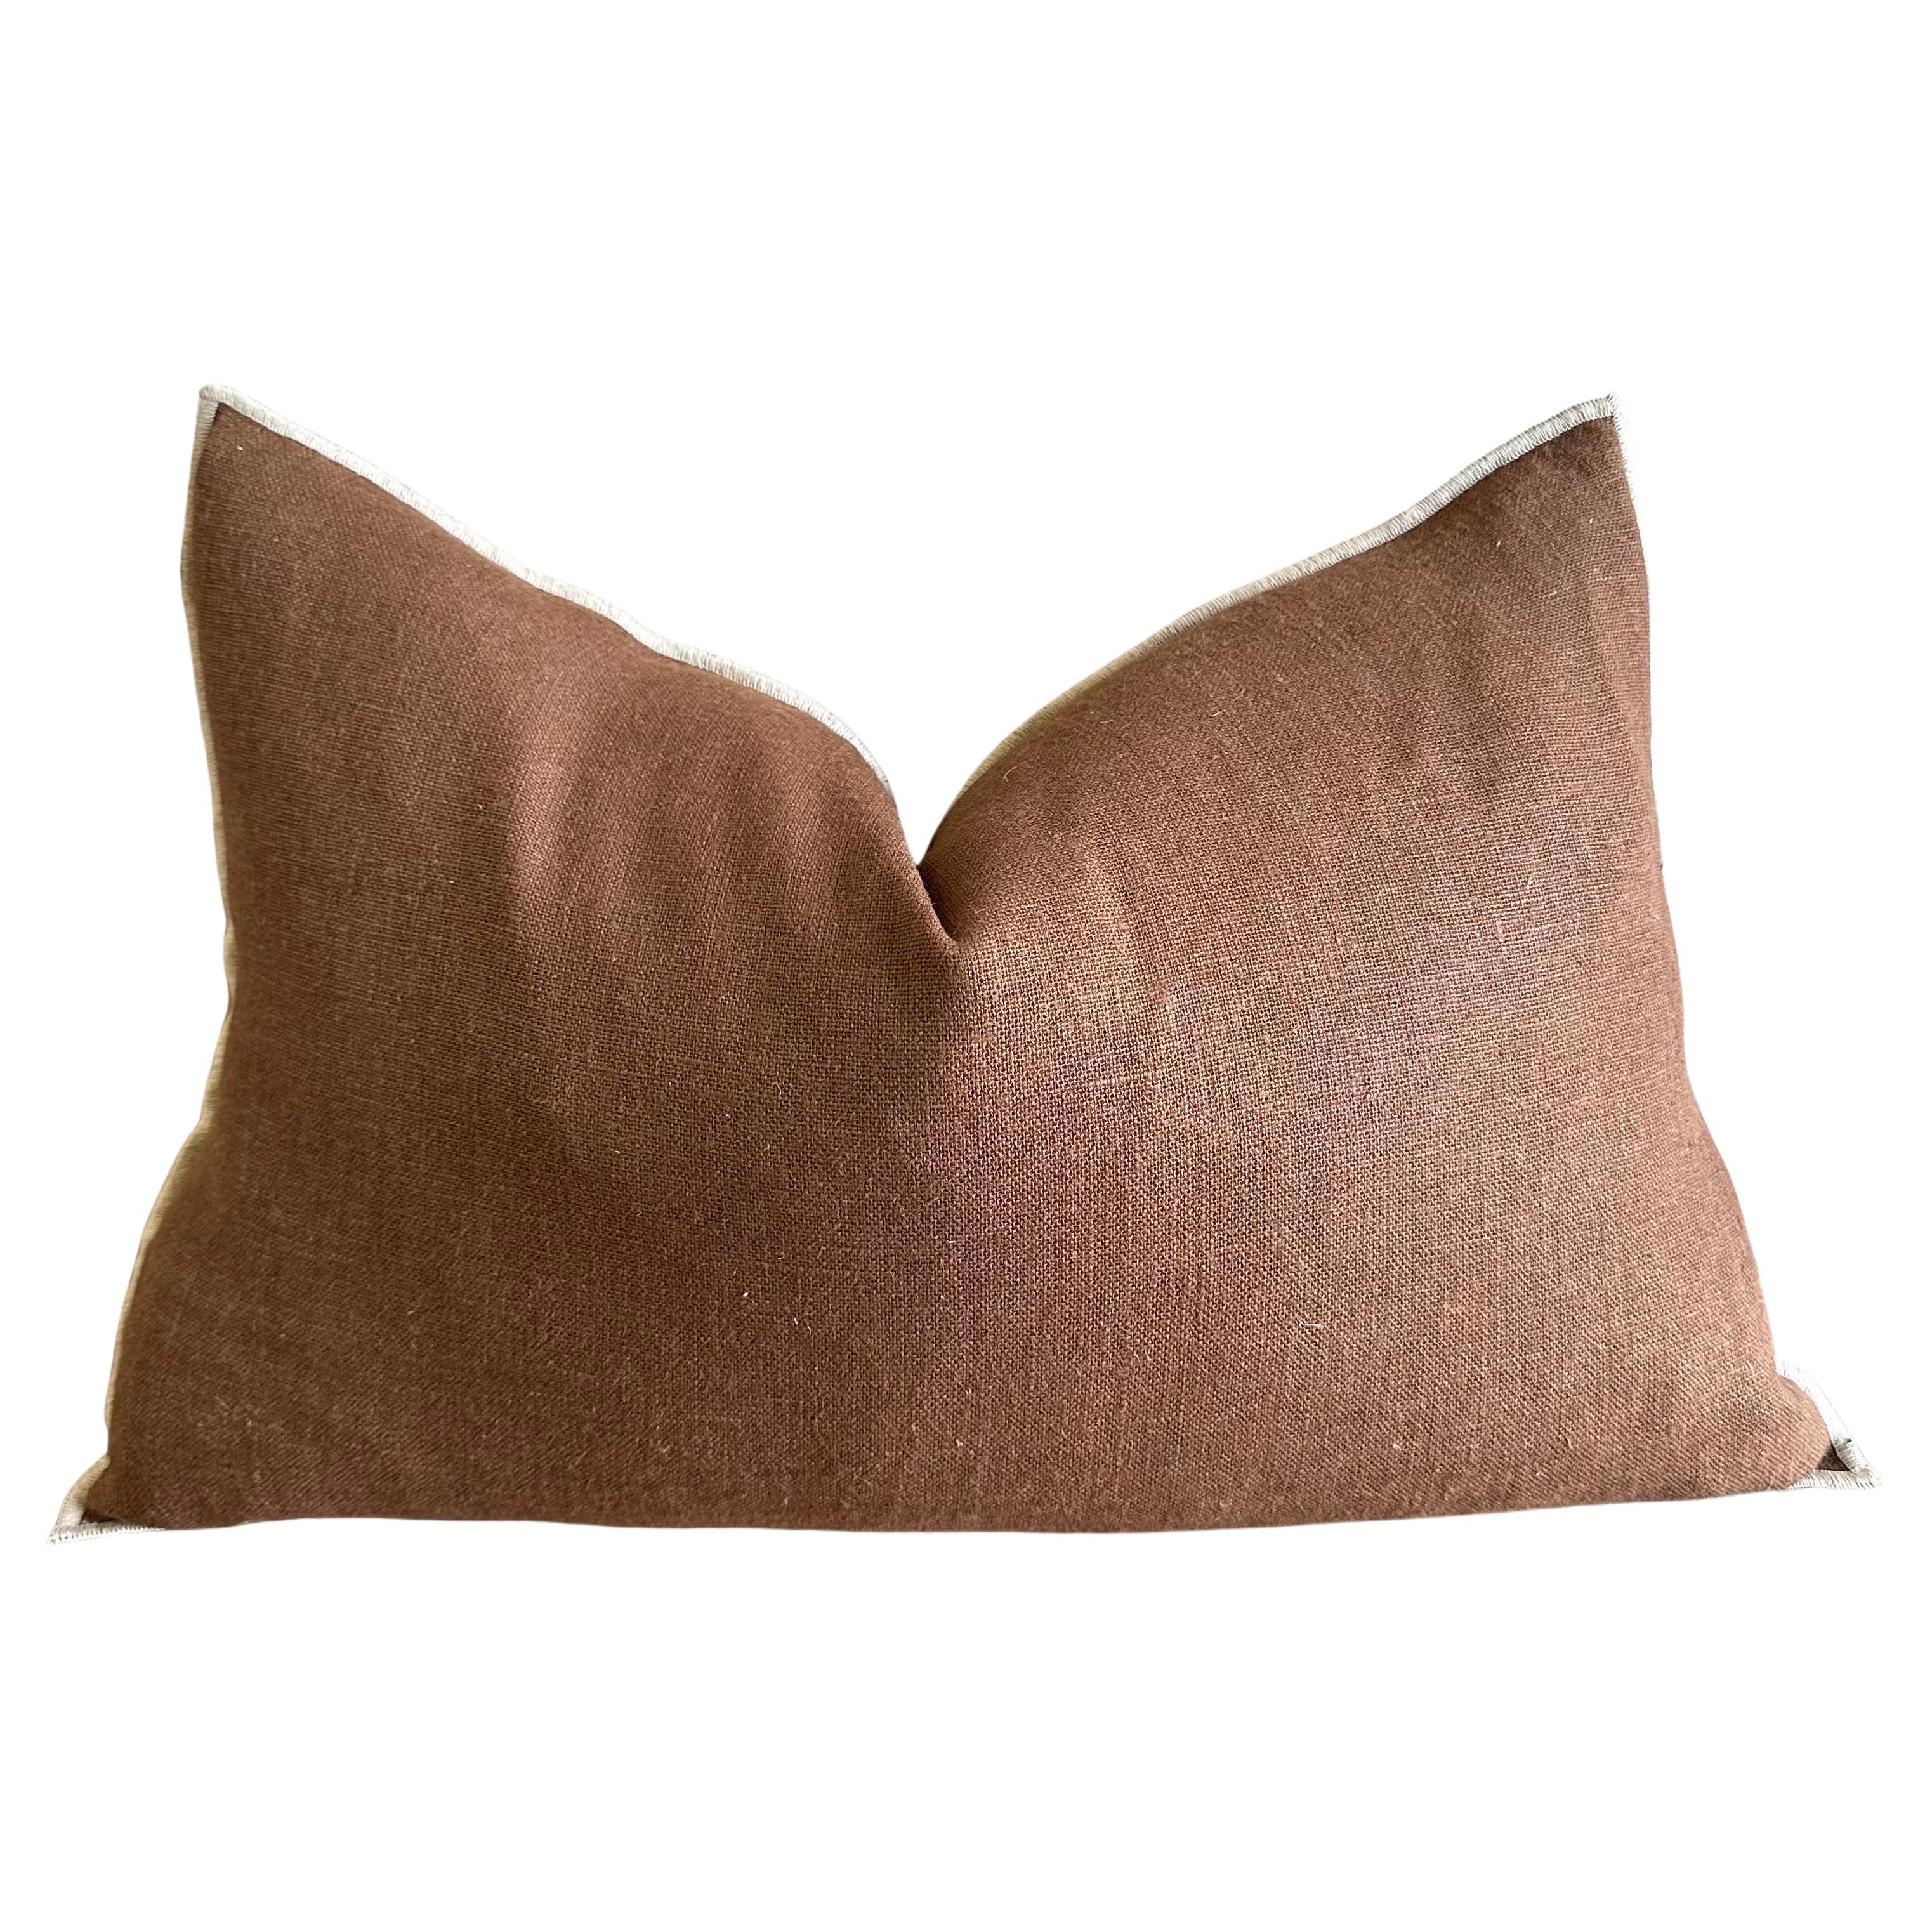 French Flax Linen Lumbar Pillow in Moka For Sale